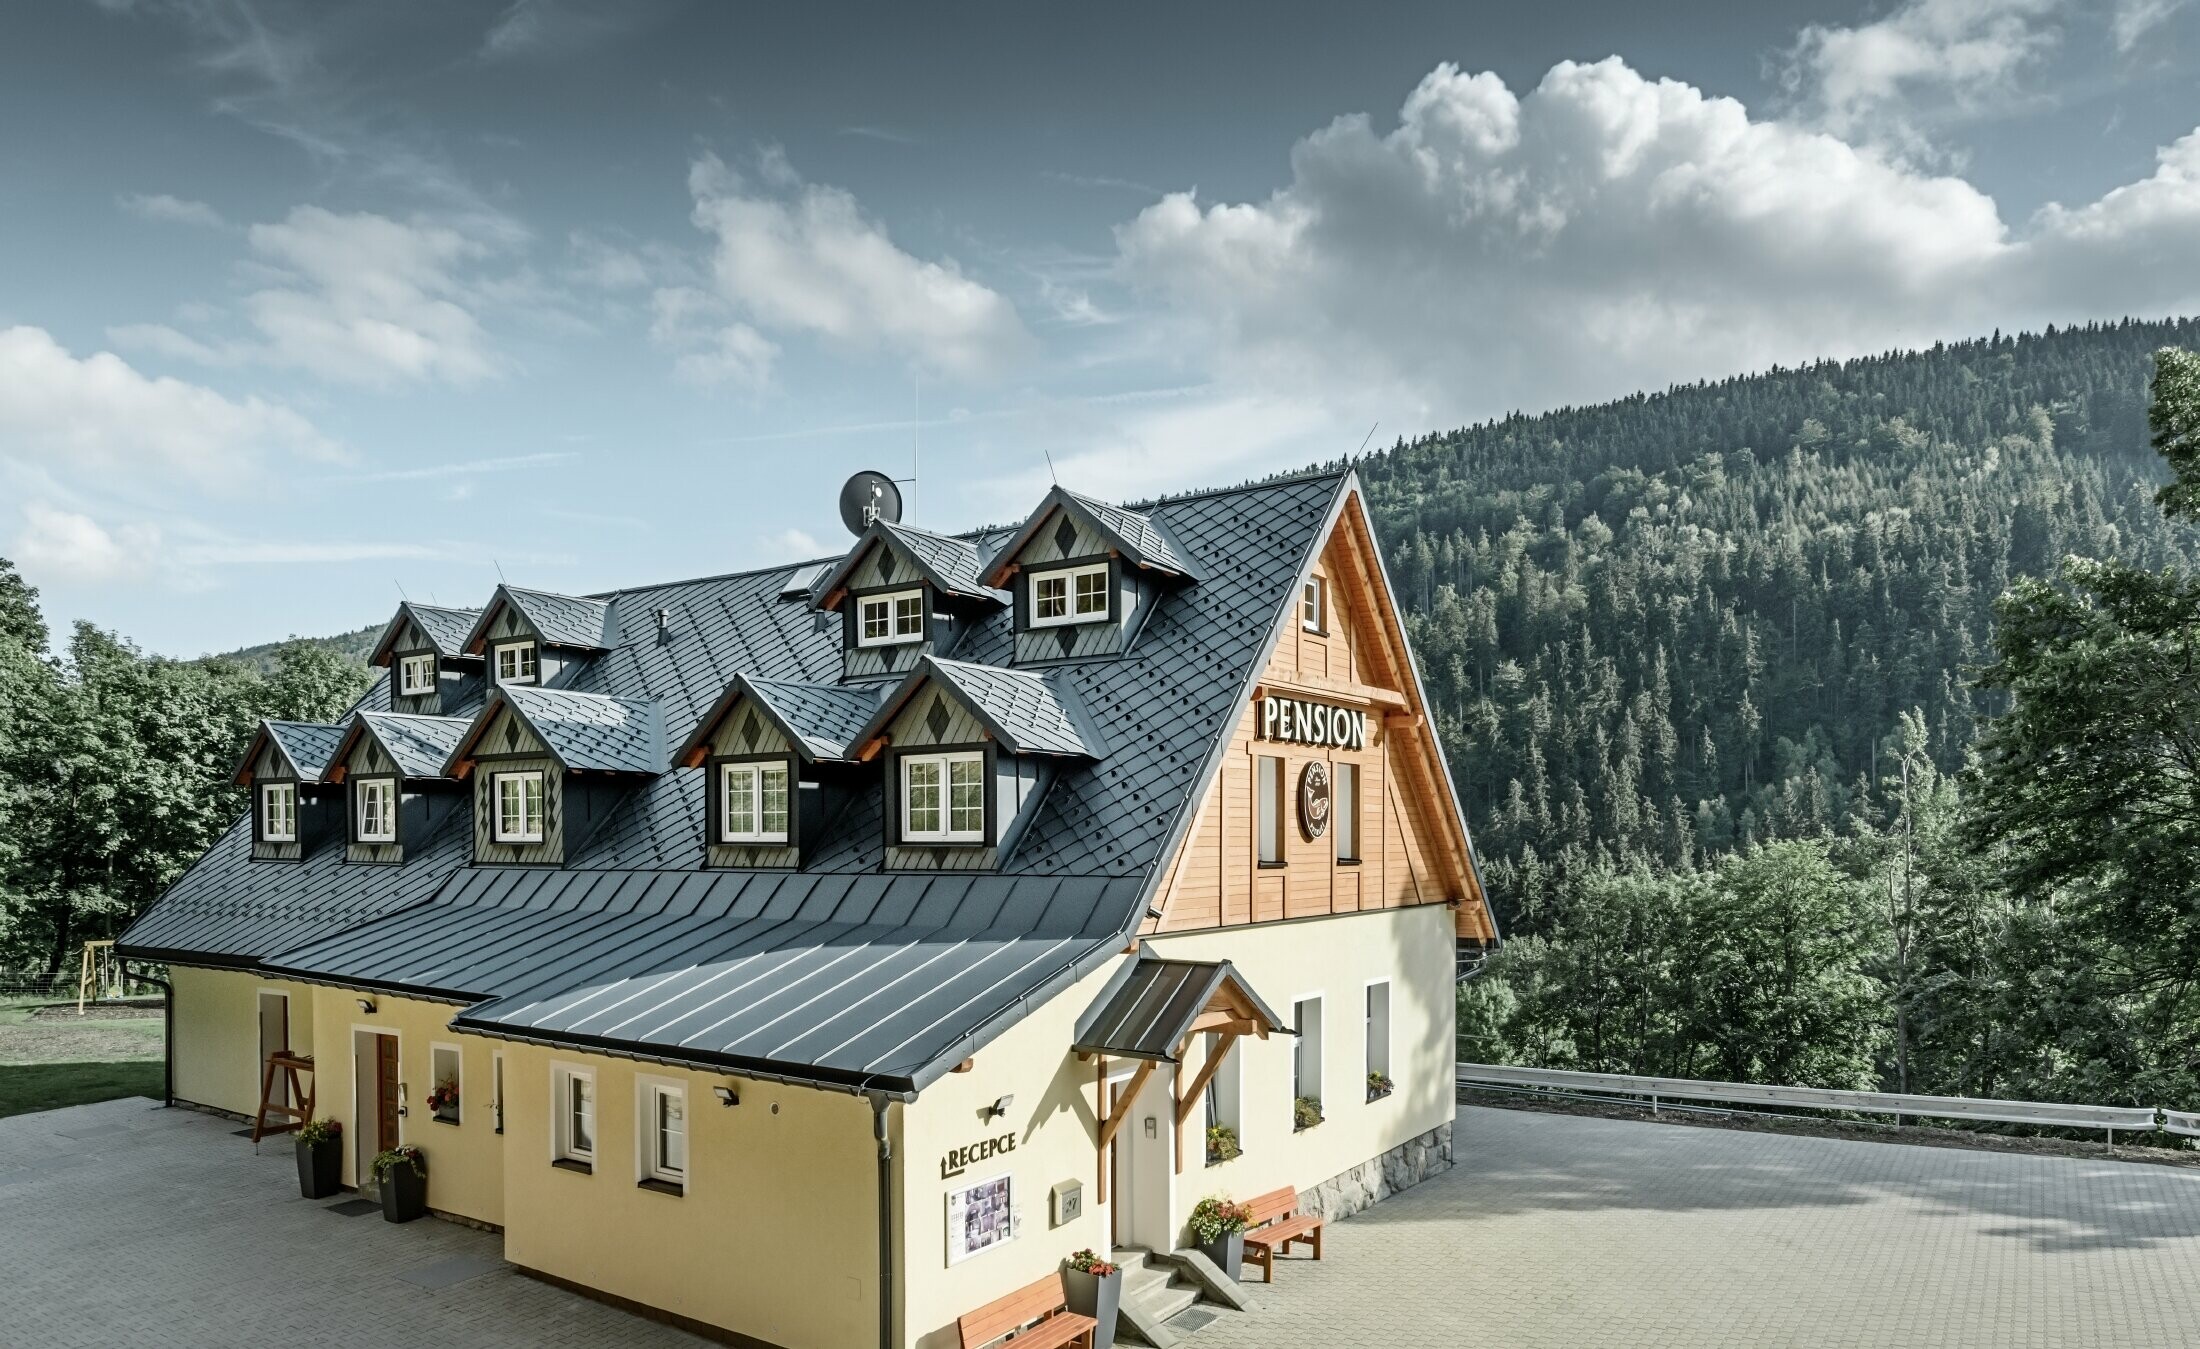 Guesthouse in the Czech Republic with pitched roof and many dormers covered with aluminium roof from PREFA, scaly rhomboid roof with snow guard system